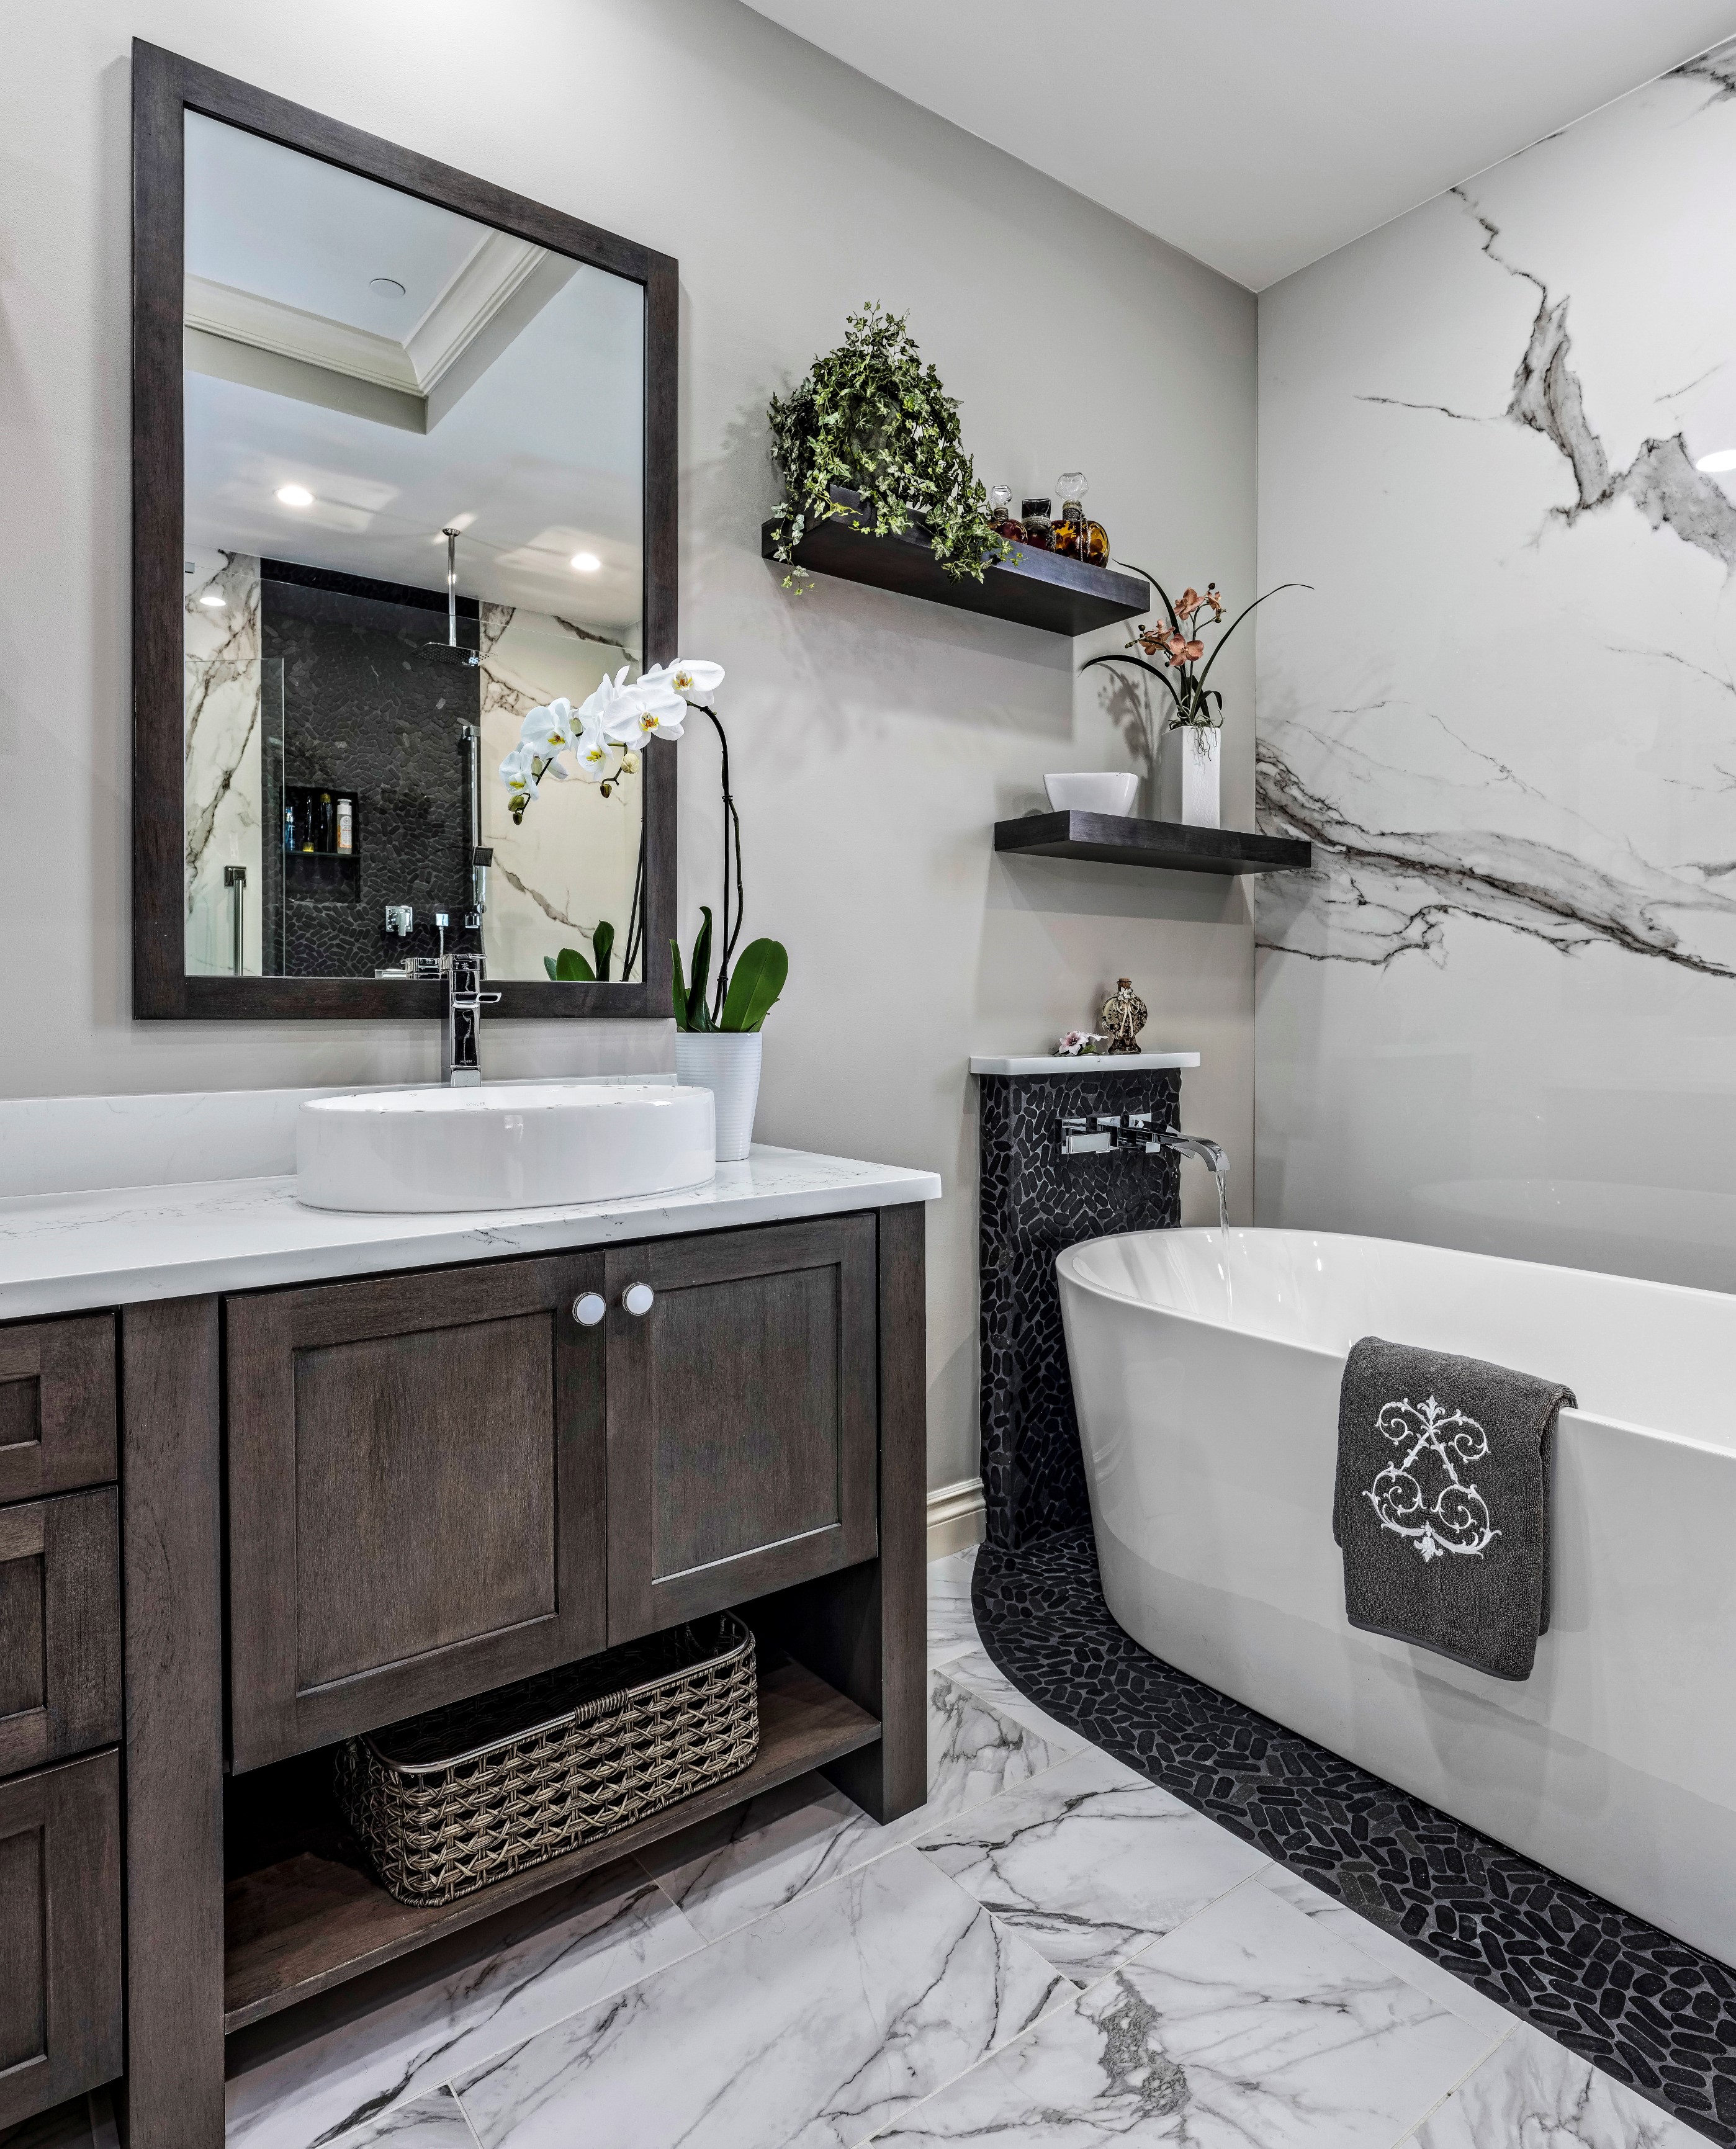 Bathroom Remodeling Typically Cost, Average Bathroom Renovation Cost